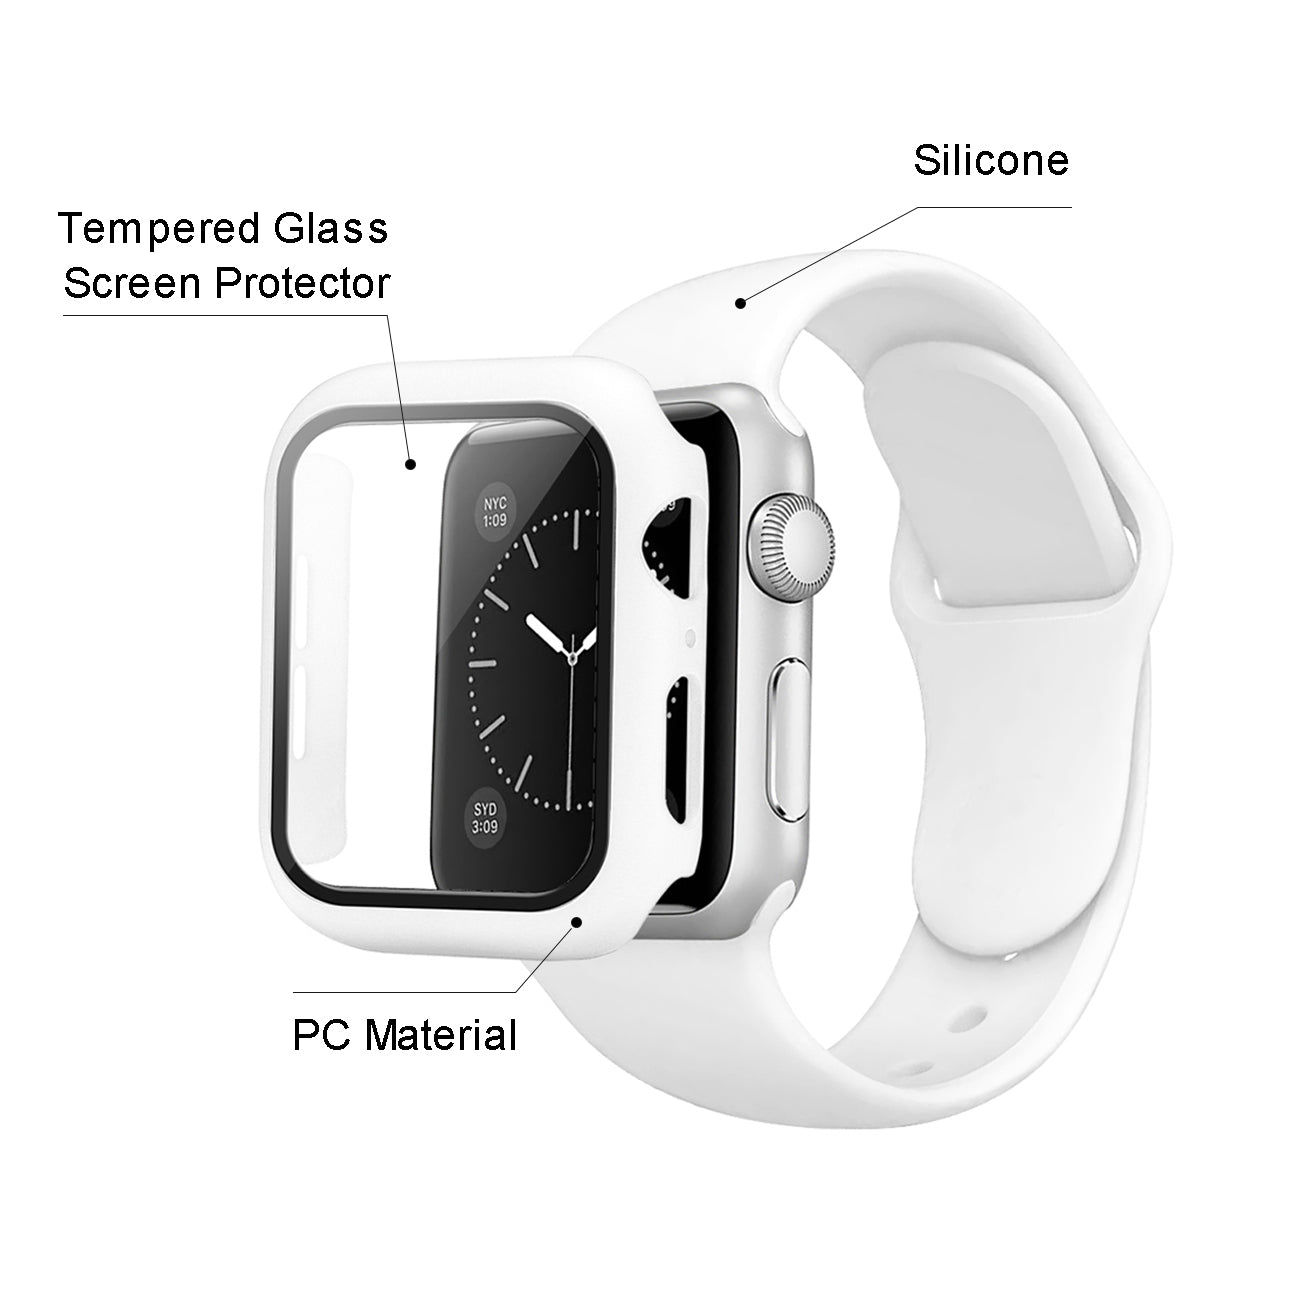 Watch Case PC With Glass Screen Protector, Silicone Watch Band Apple Watch 40mm White Color